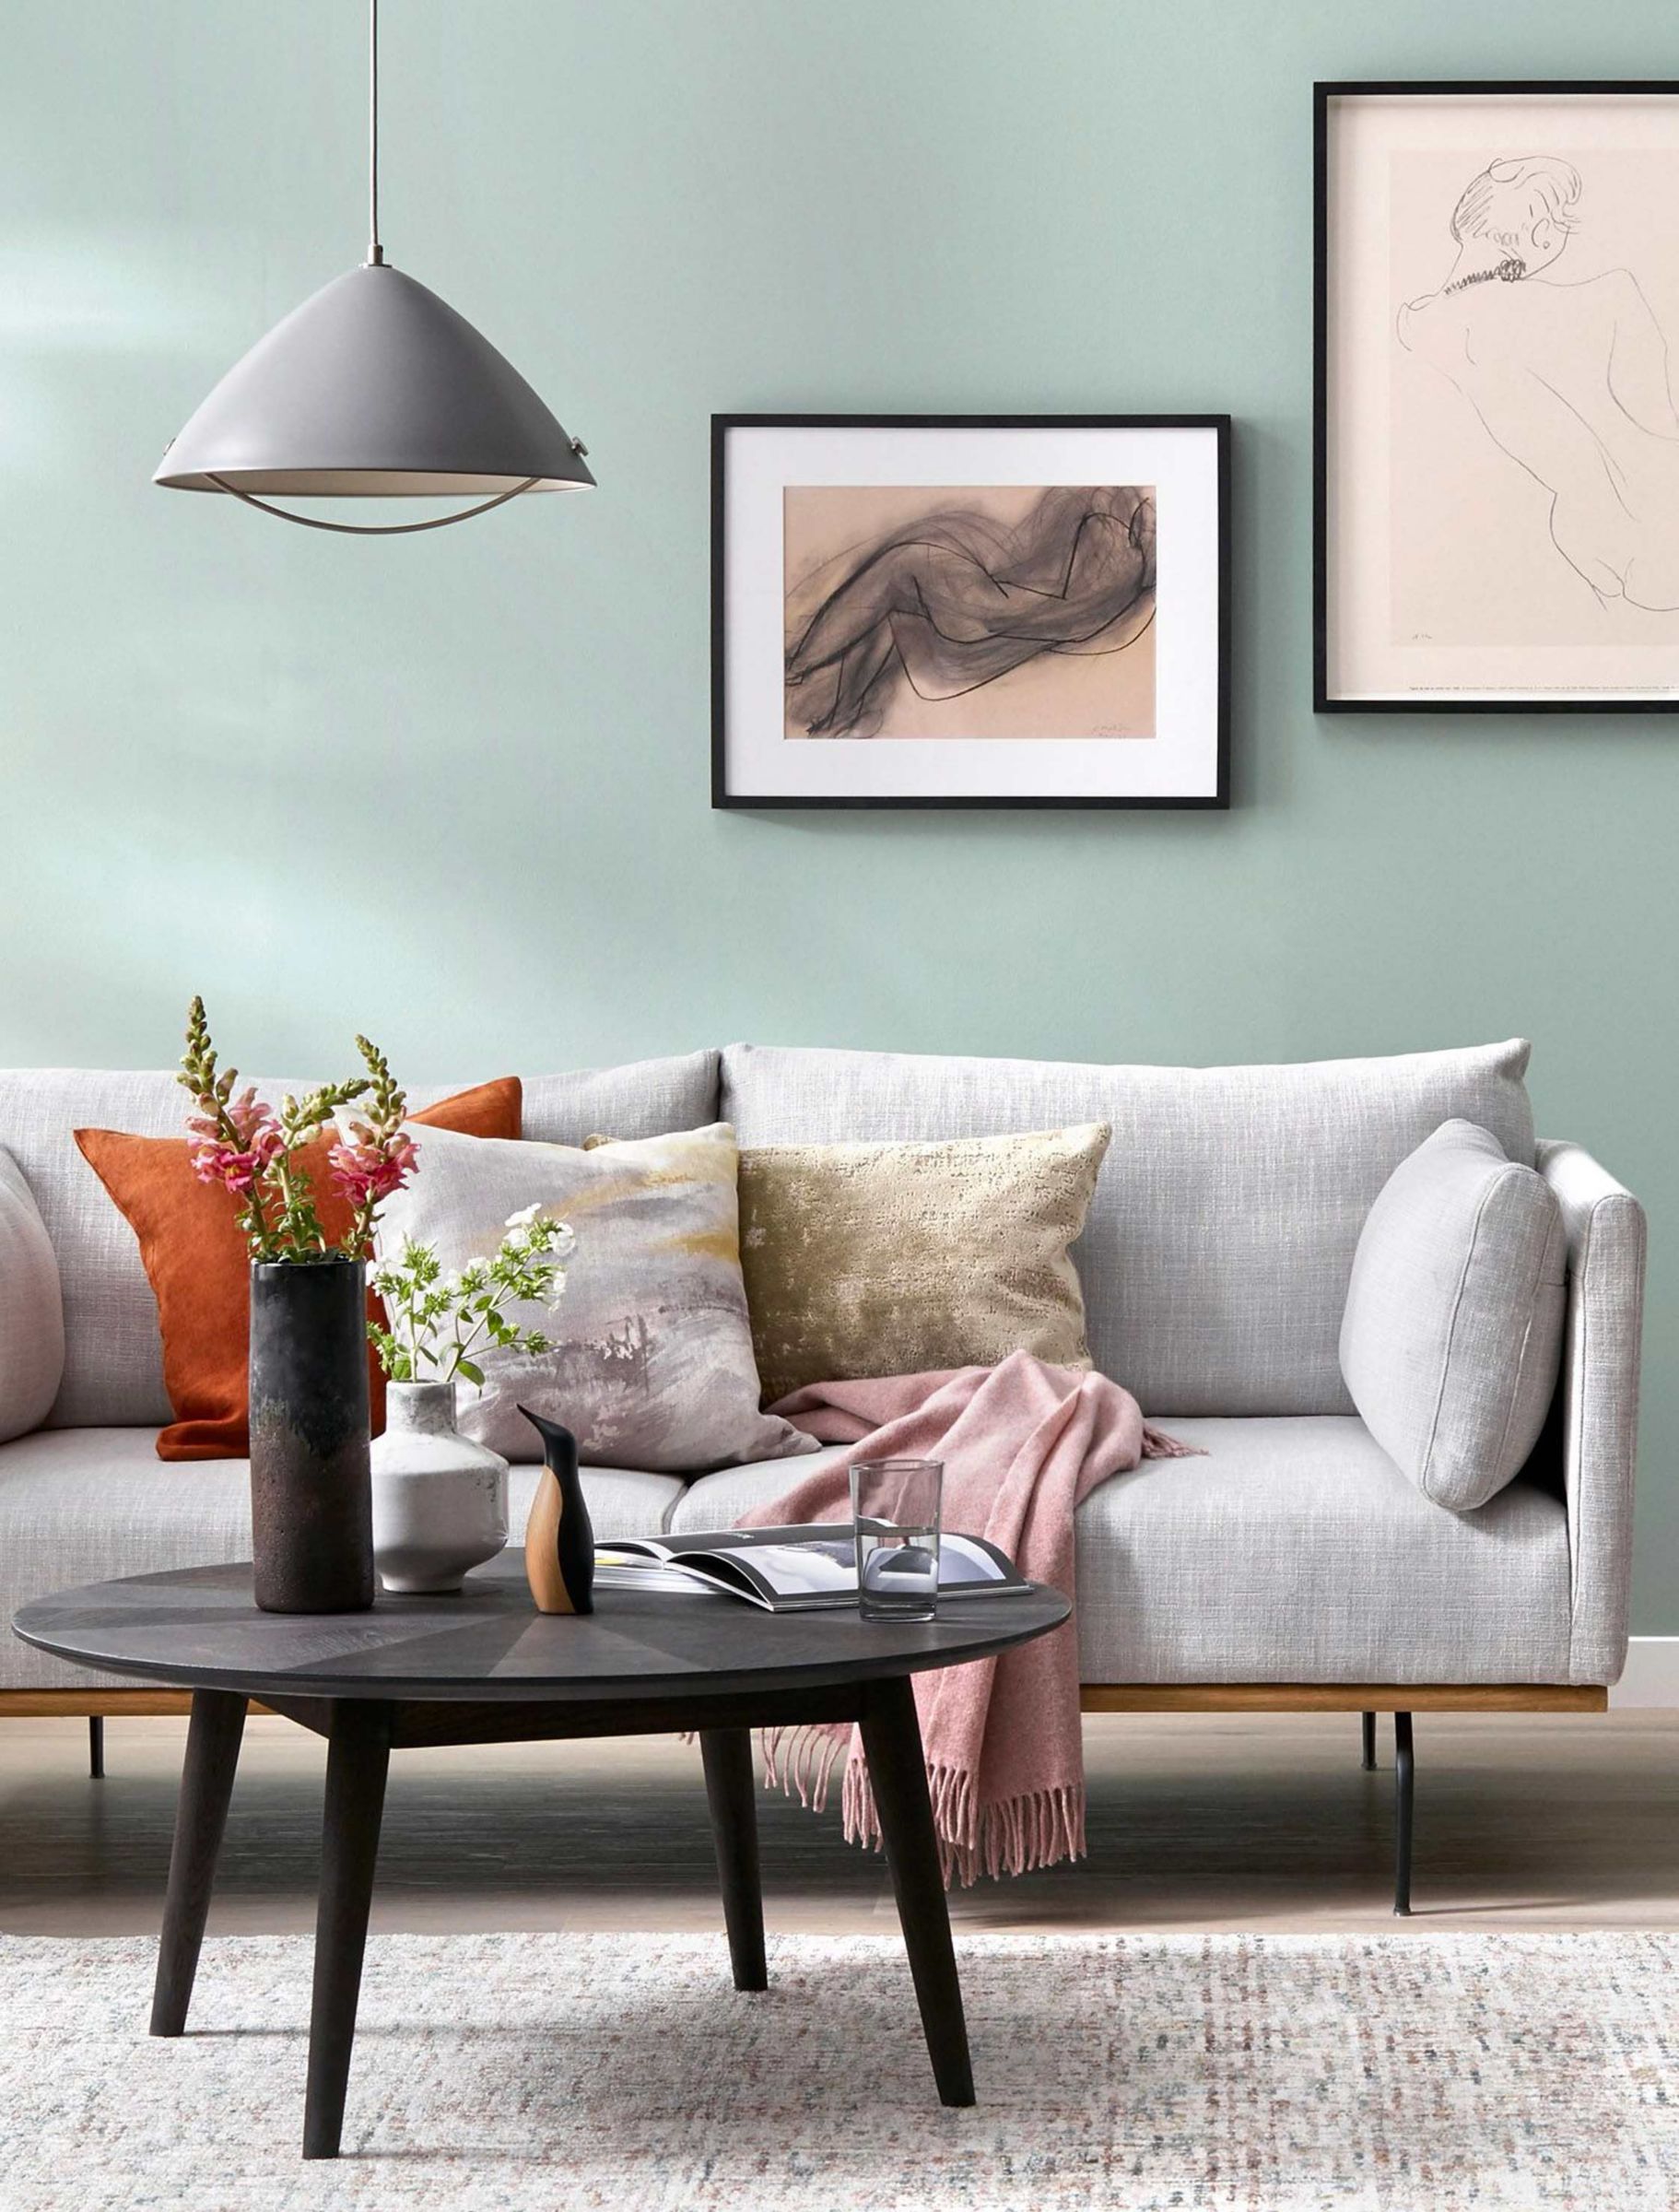 Stylish living room, with on-trend accessories and assortment of accessories